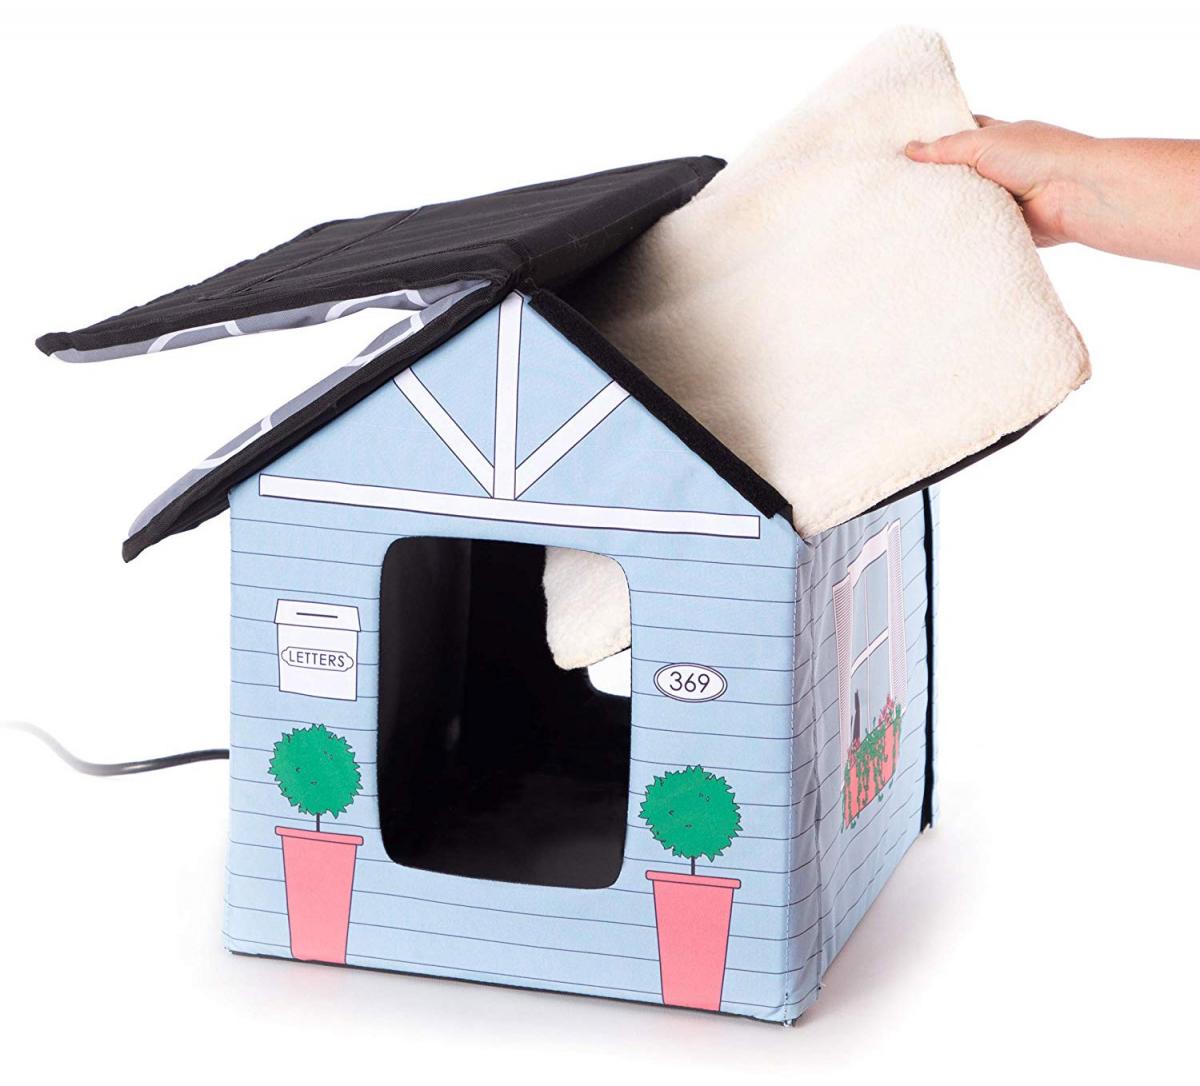 Heated Outdoors Cat House - Electric cat house keeps kitties warm while outside during winter